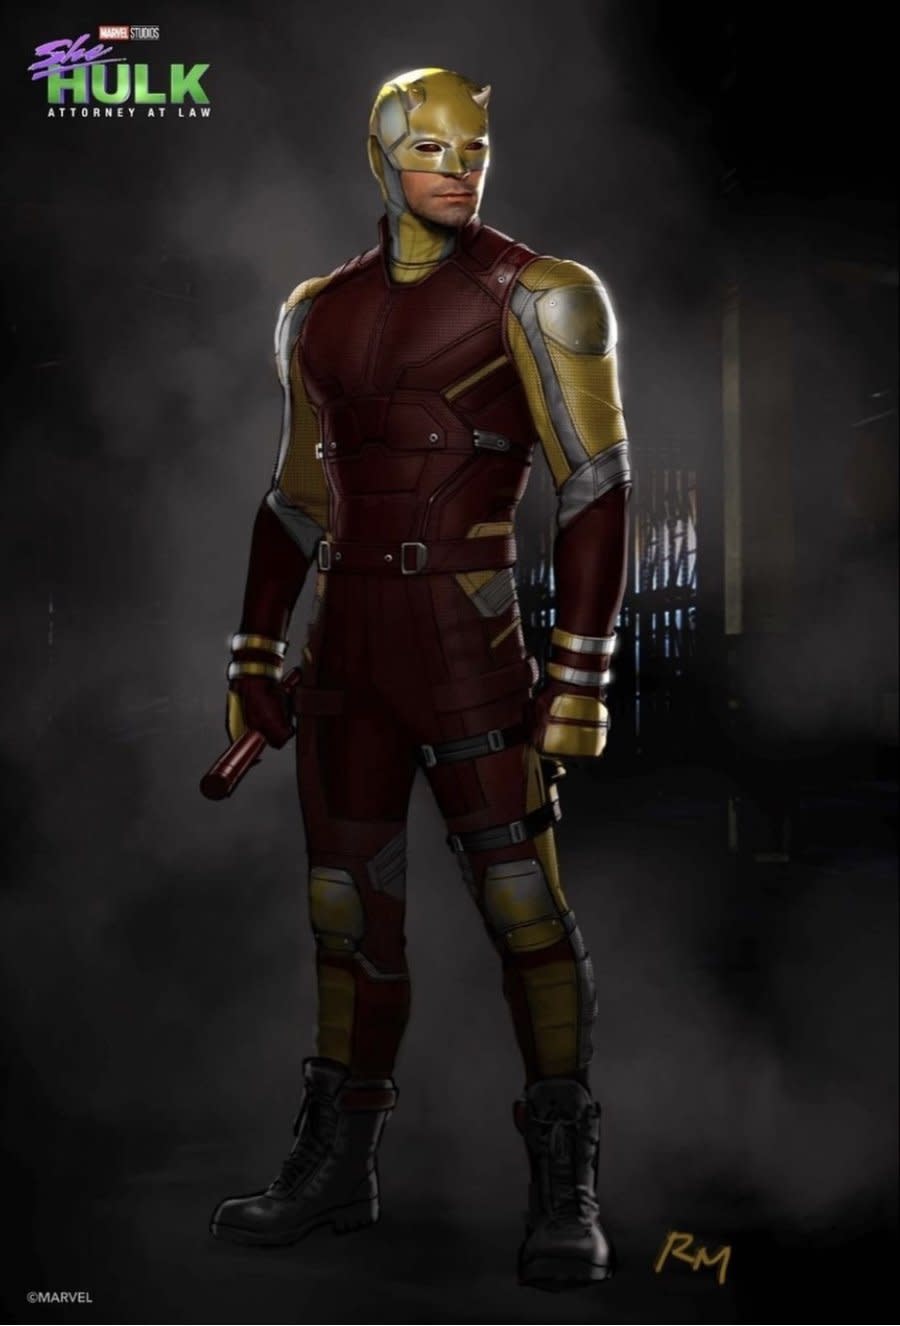 Daredevil's Ketchup and Mustard Suit Shines in SHE-HULK Concept Art